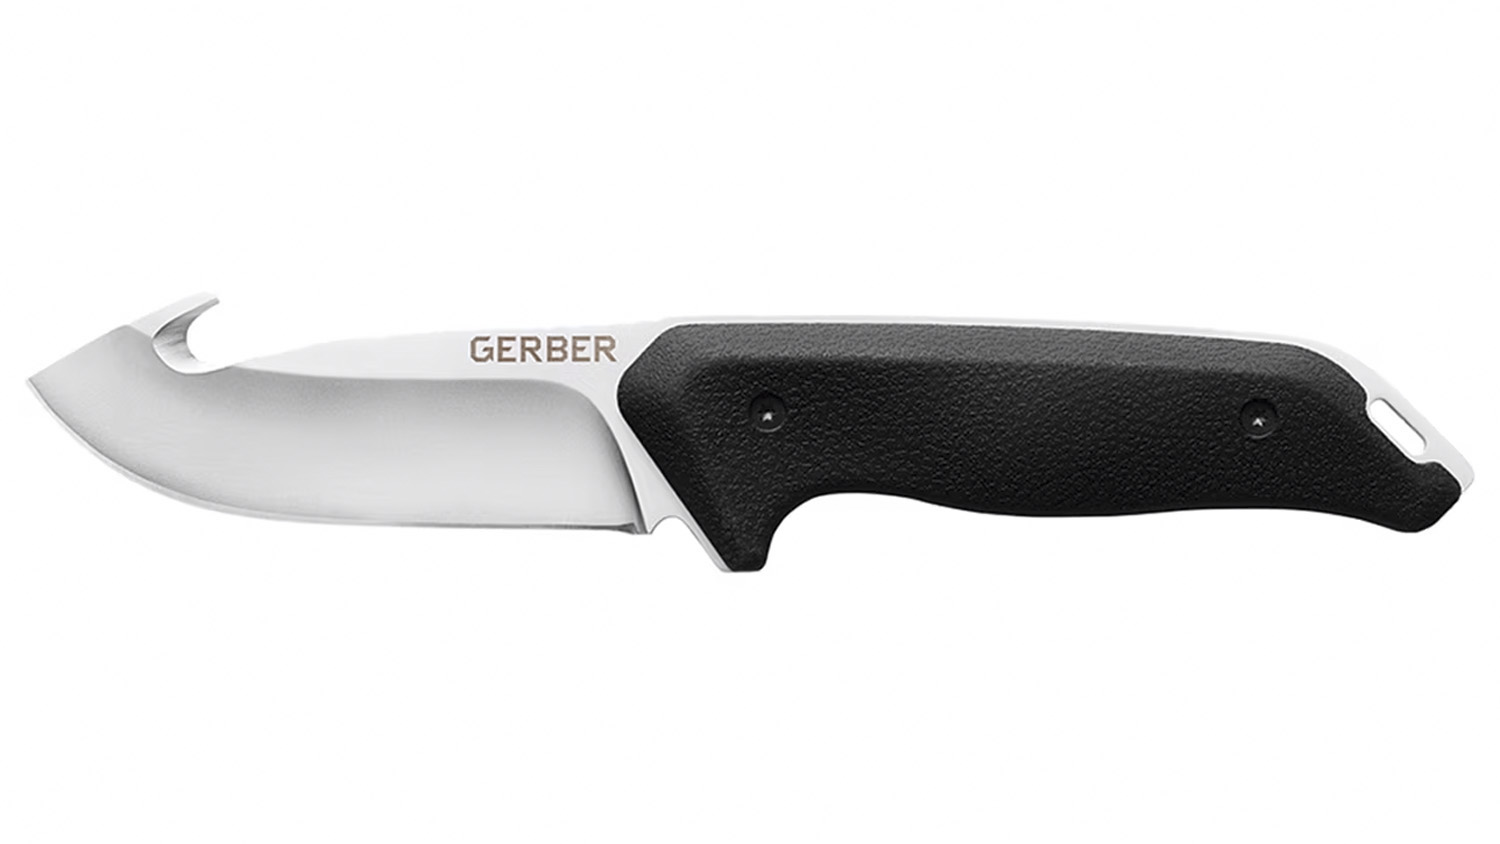 Gerber Moment Knife ideal for gutting in the field while deer hunting